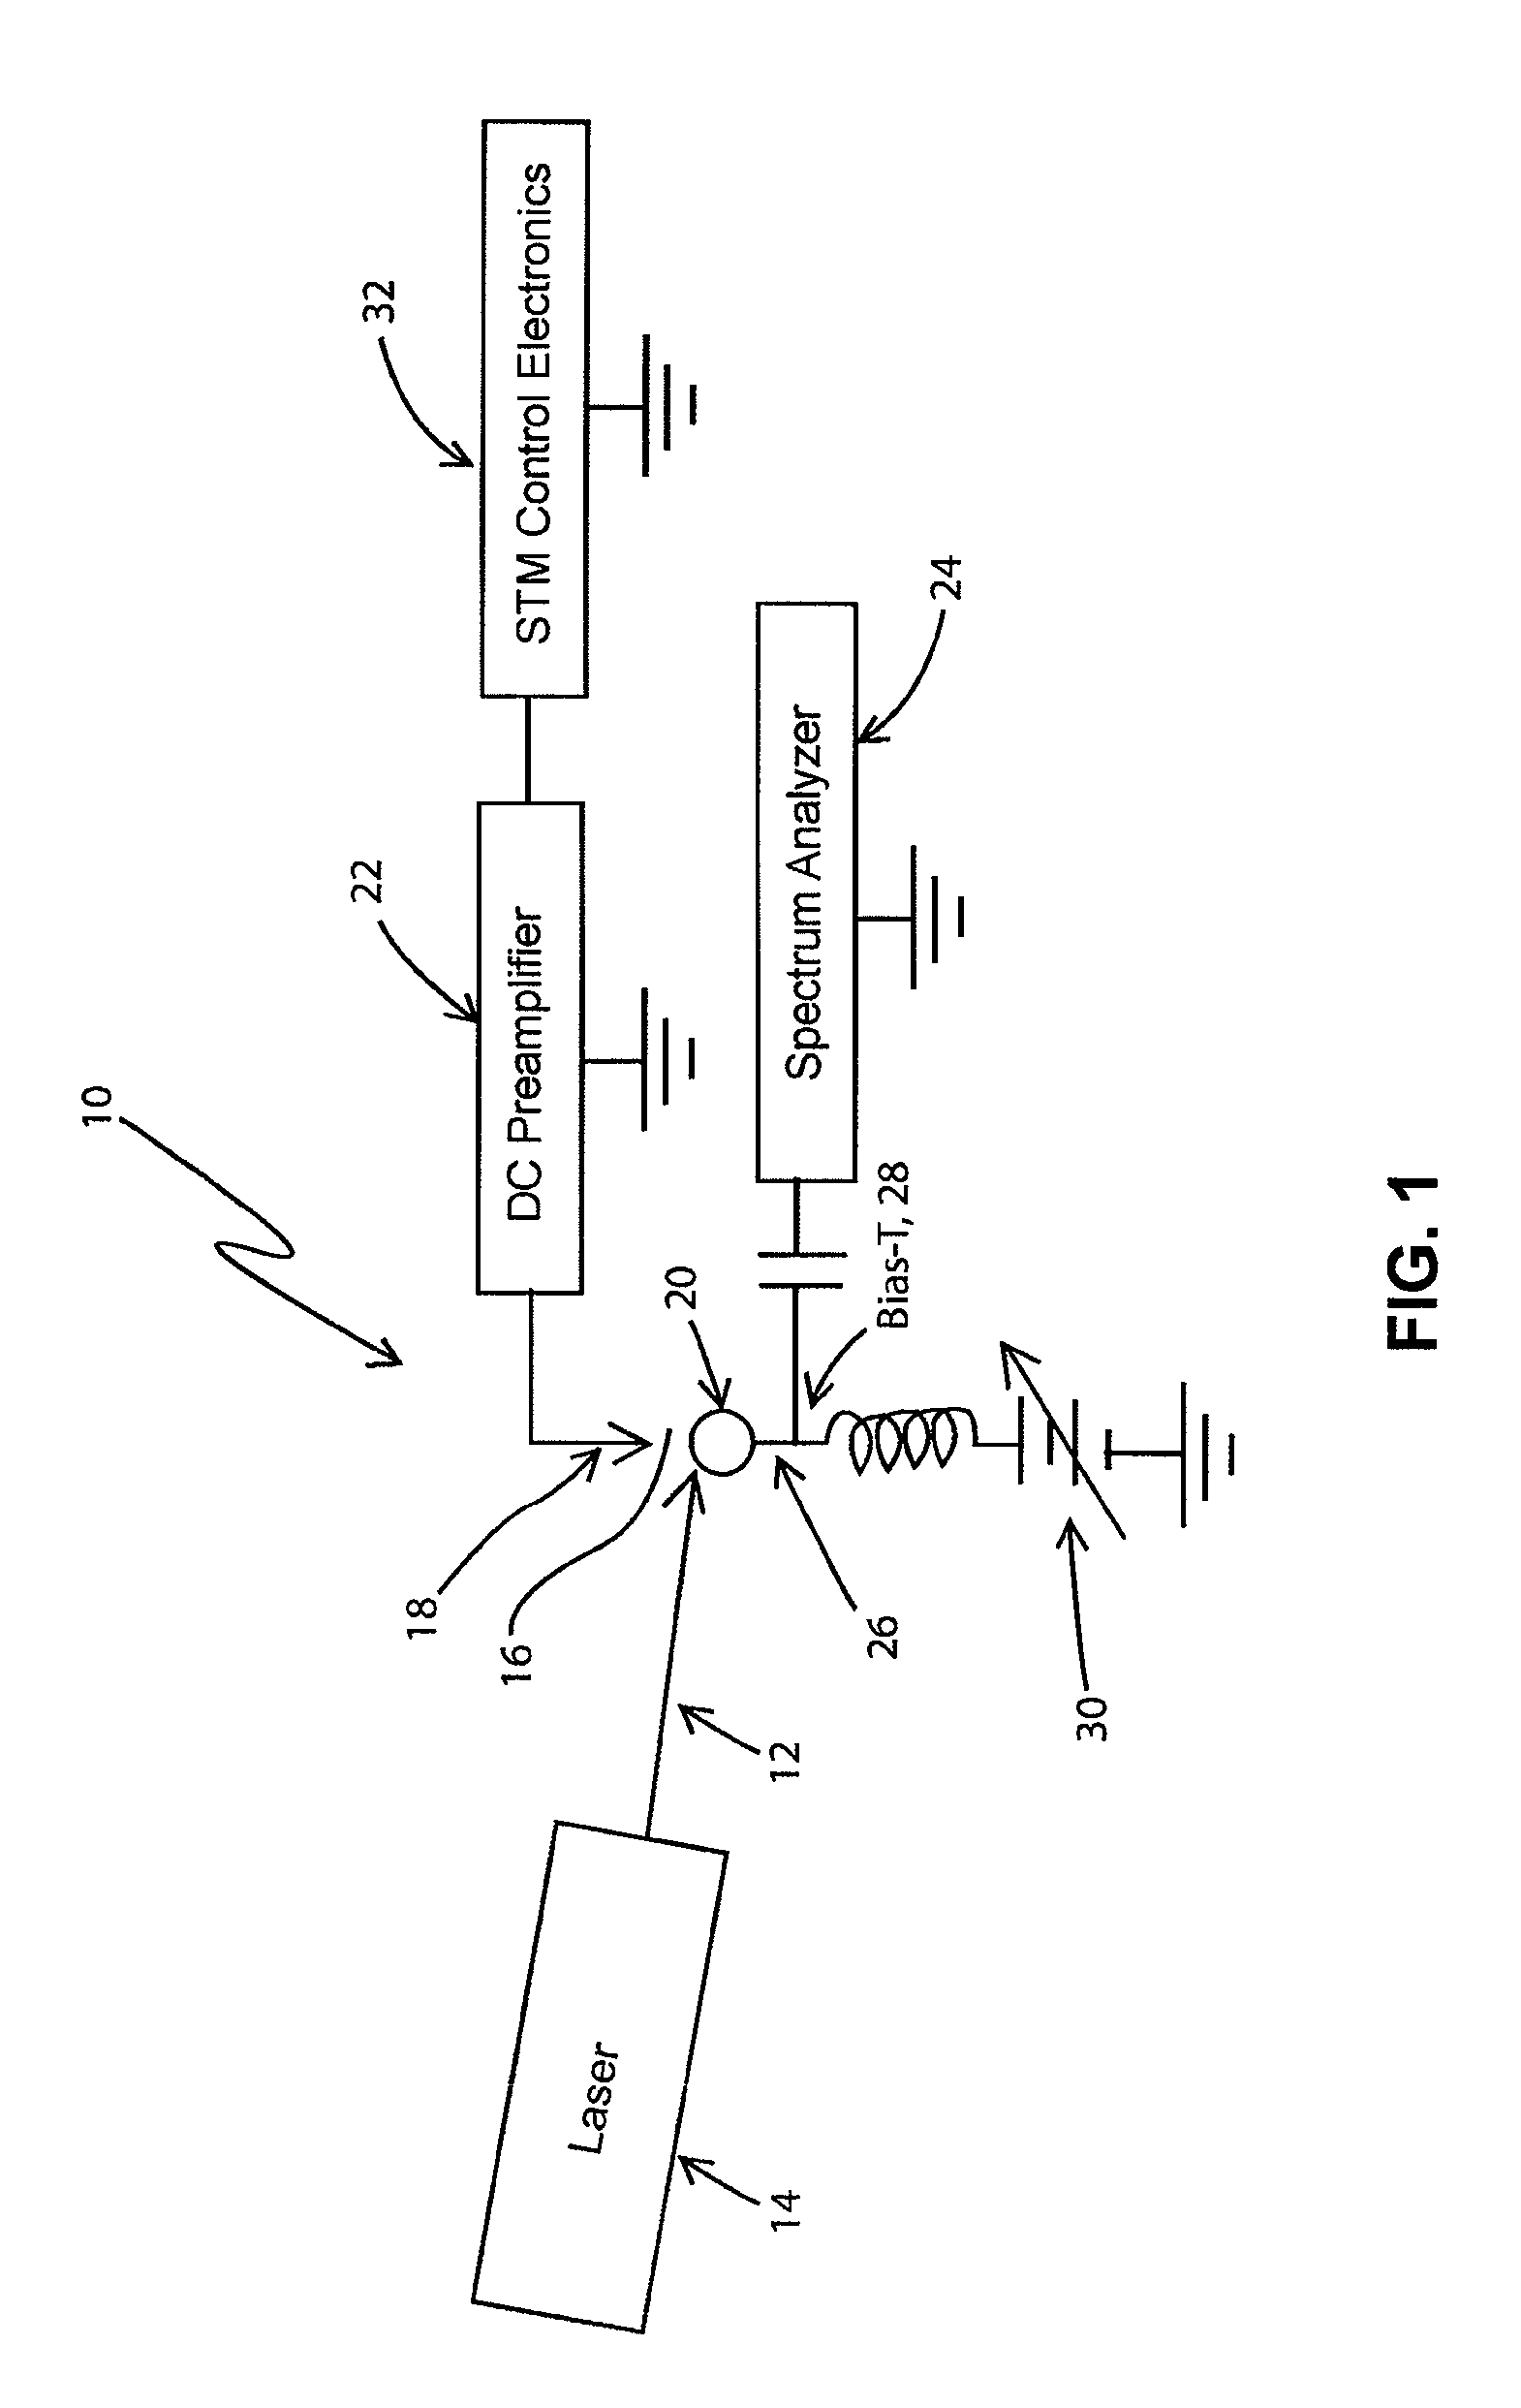 Generation of a frequency comb and applications thereof